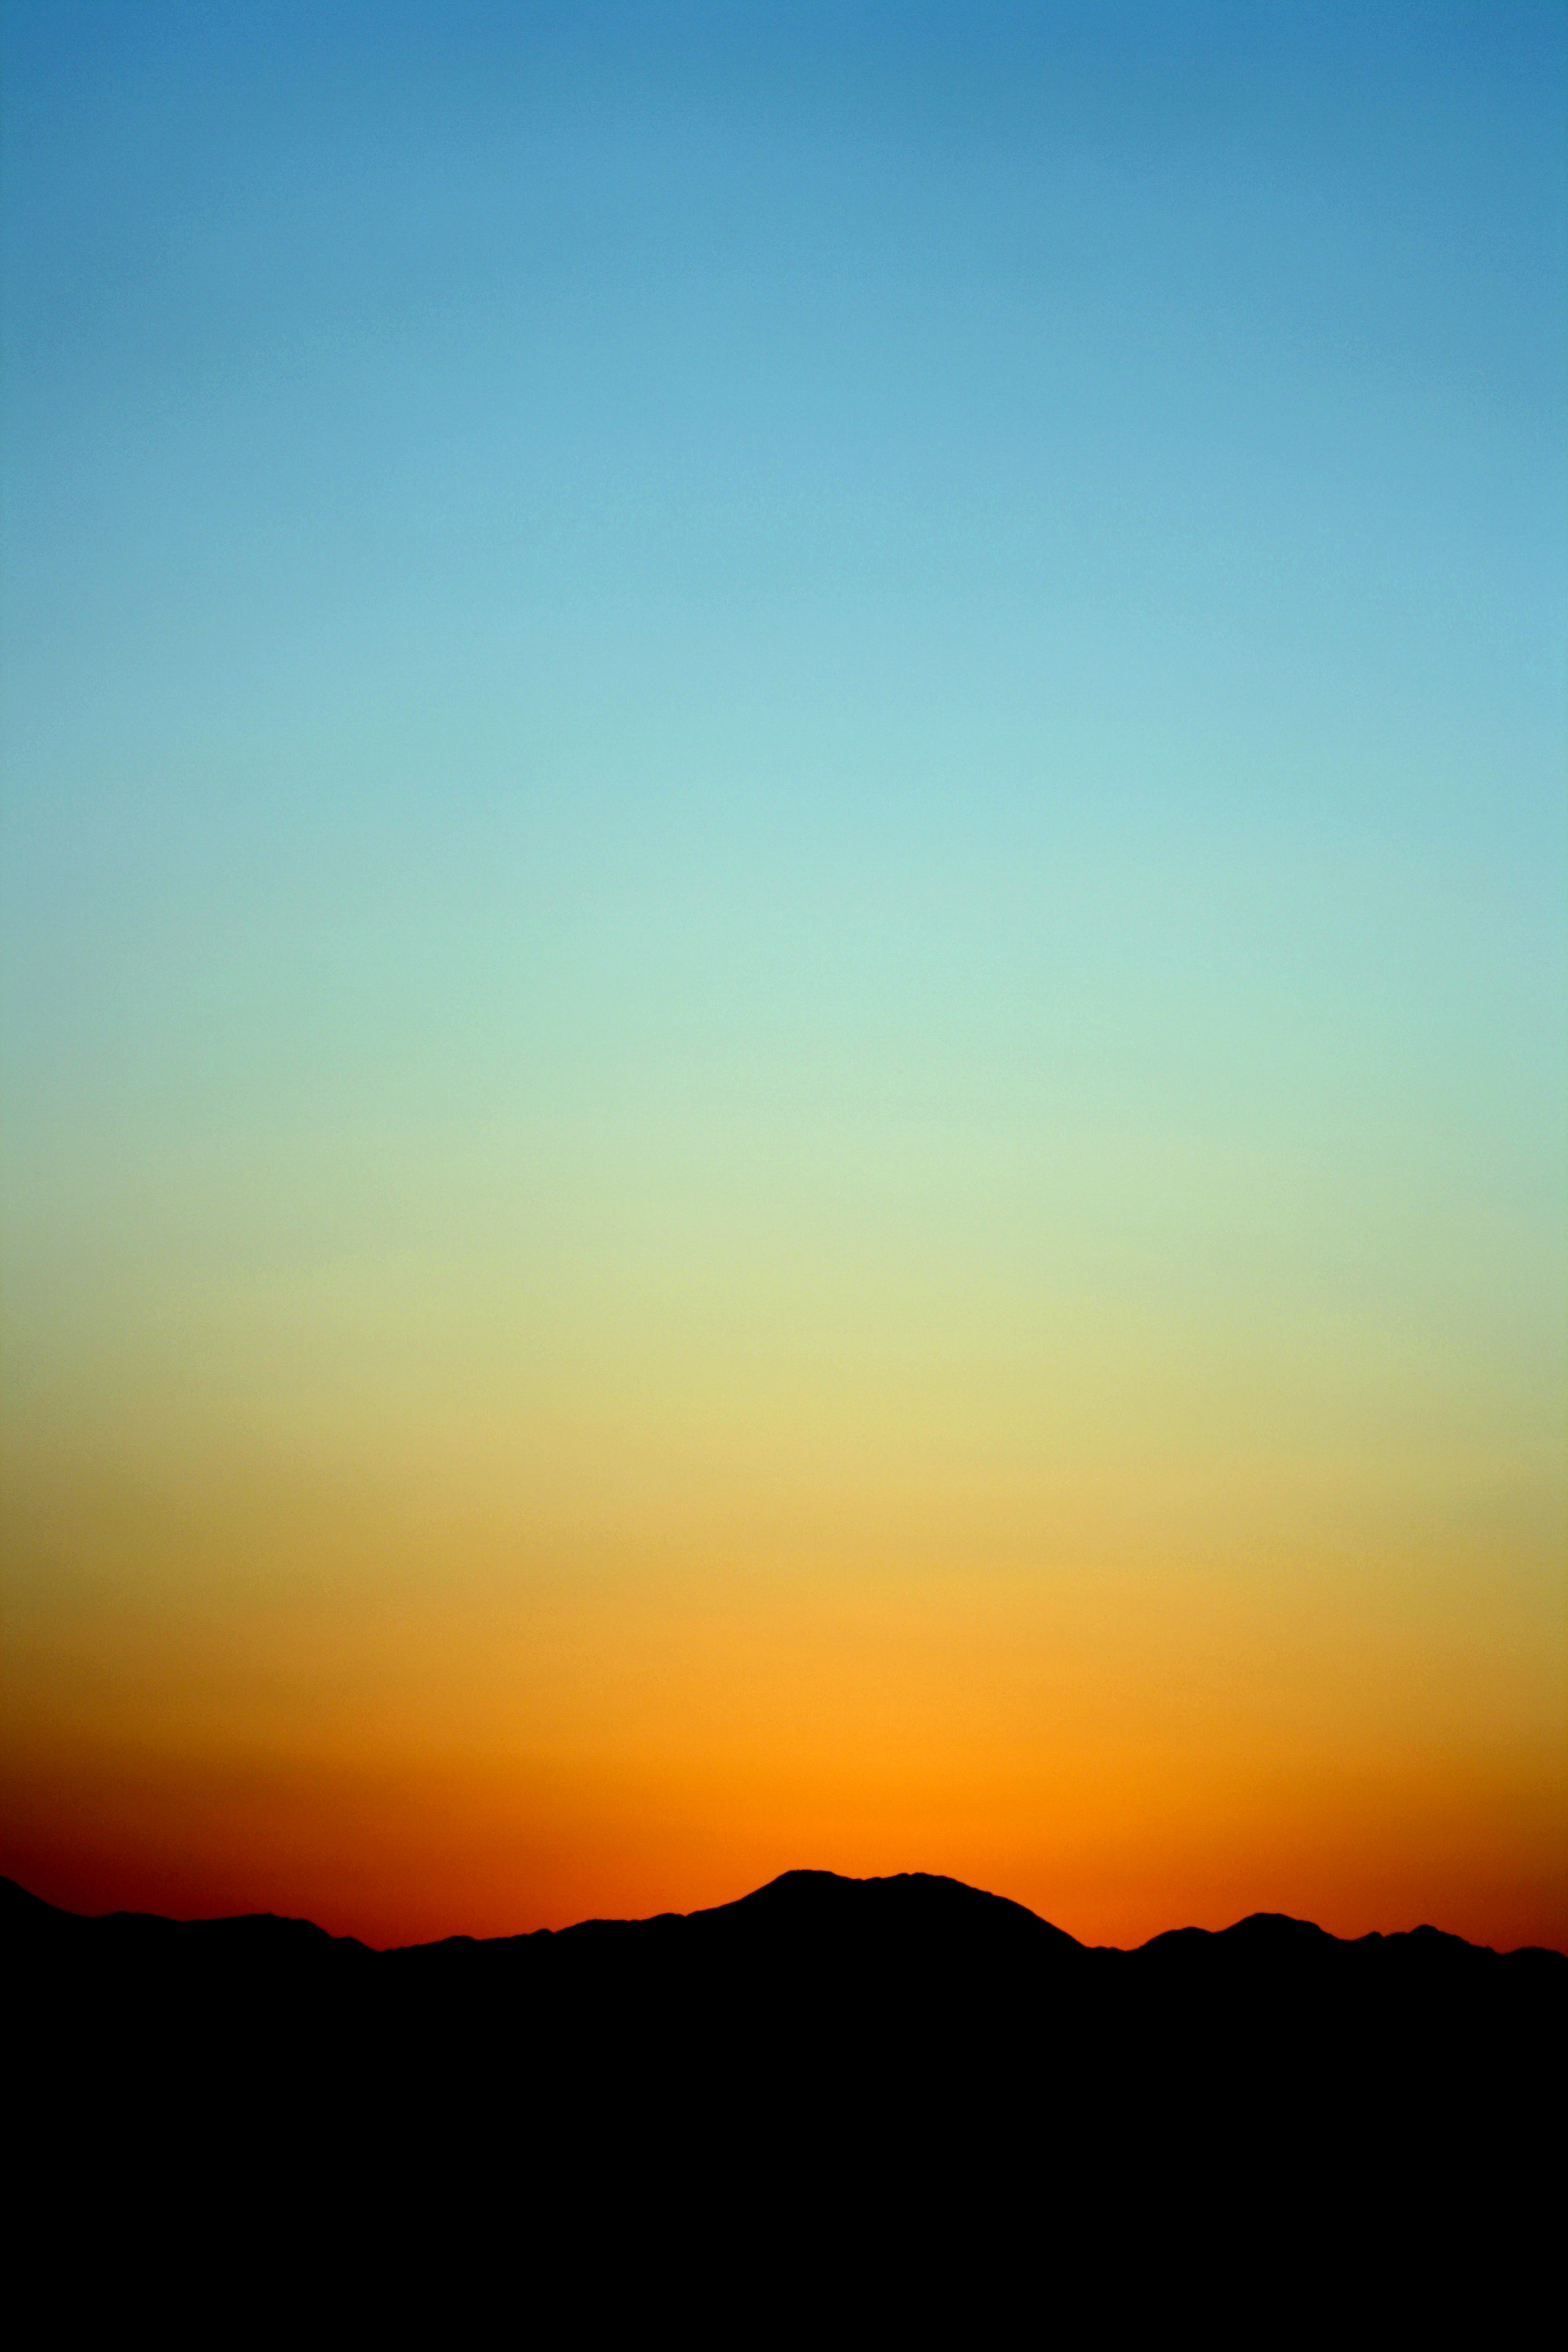 Silhouette of Mountain Under Orange and Blue Sky during Sunset, Color, Colour, Dawn, Dusk, HQ Photo